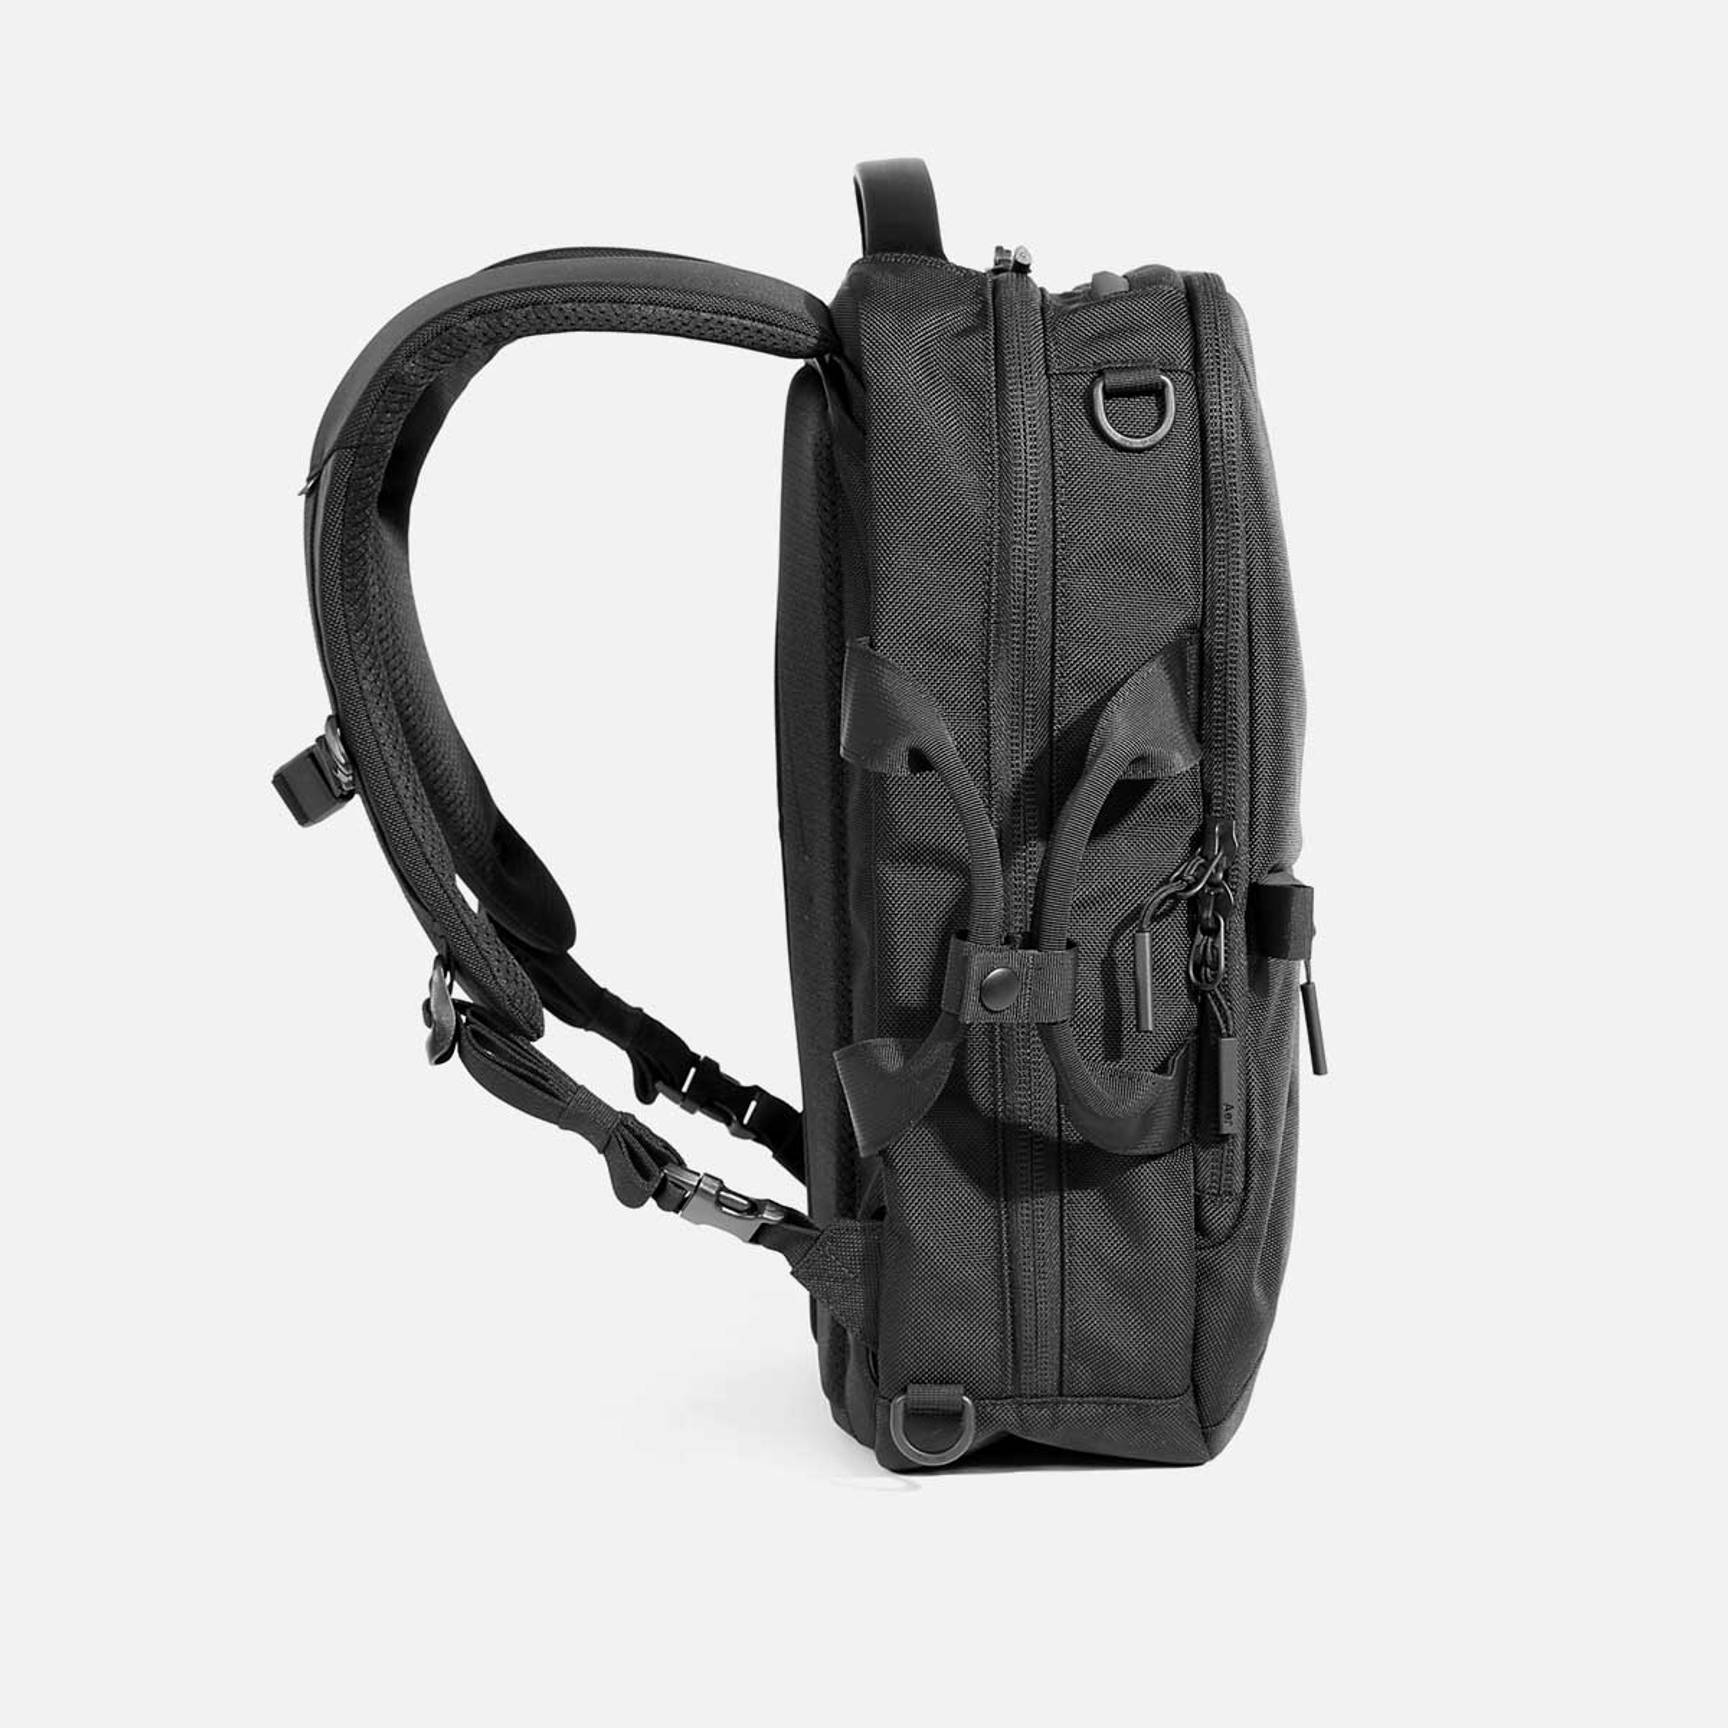 Travel Pack 3 X-Pac – Aer